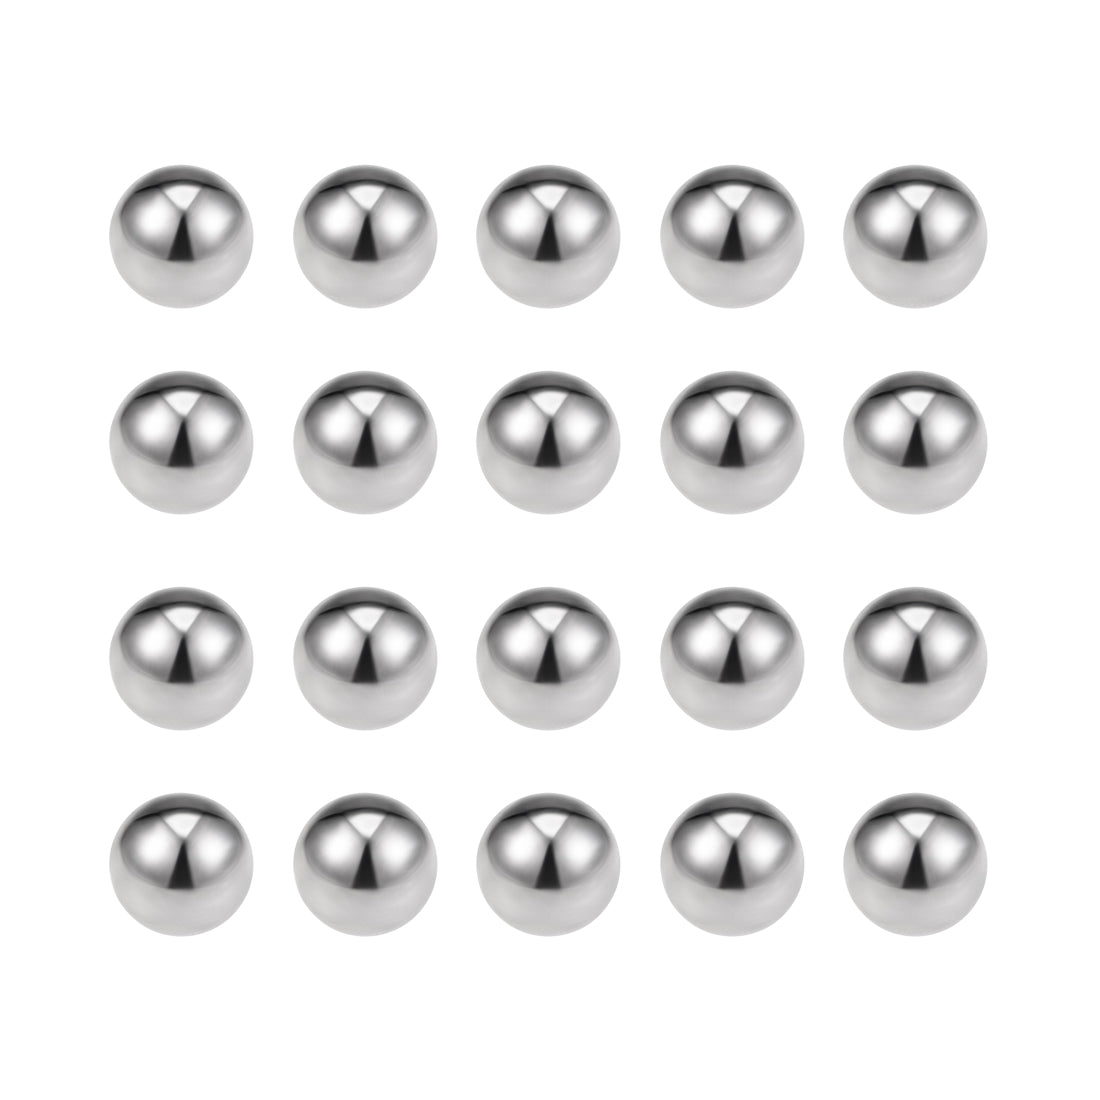 Uxcell Uxcell 3.5mm Bearing Balls 440C Stainless Steel G25 Precision Balls 100pcs